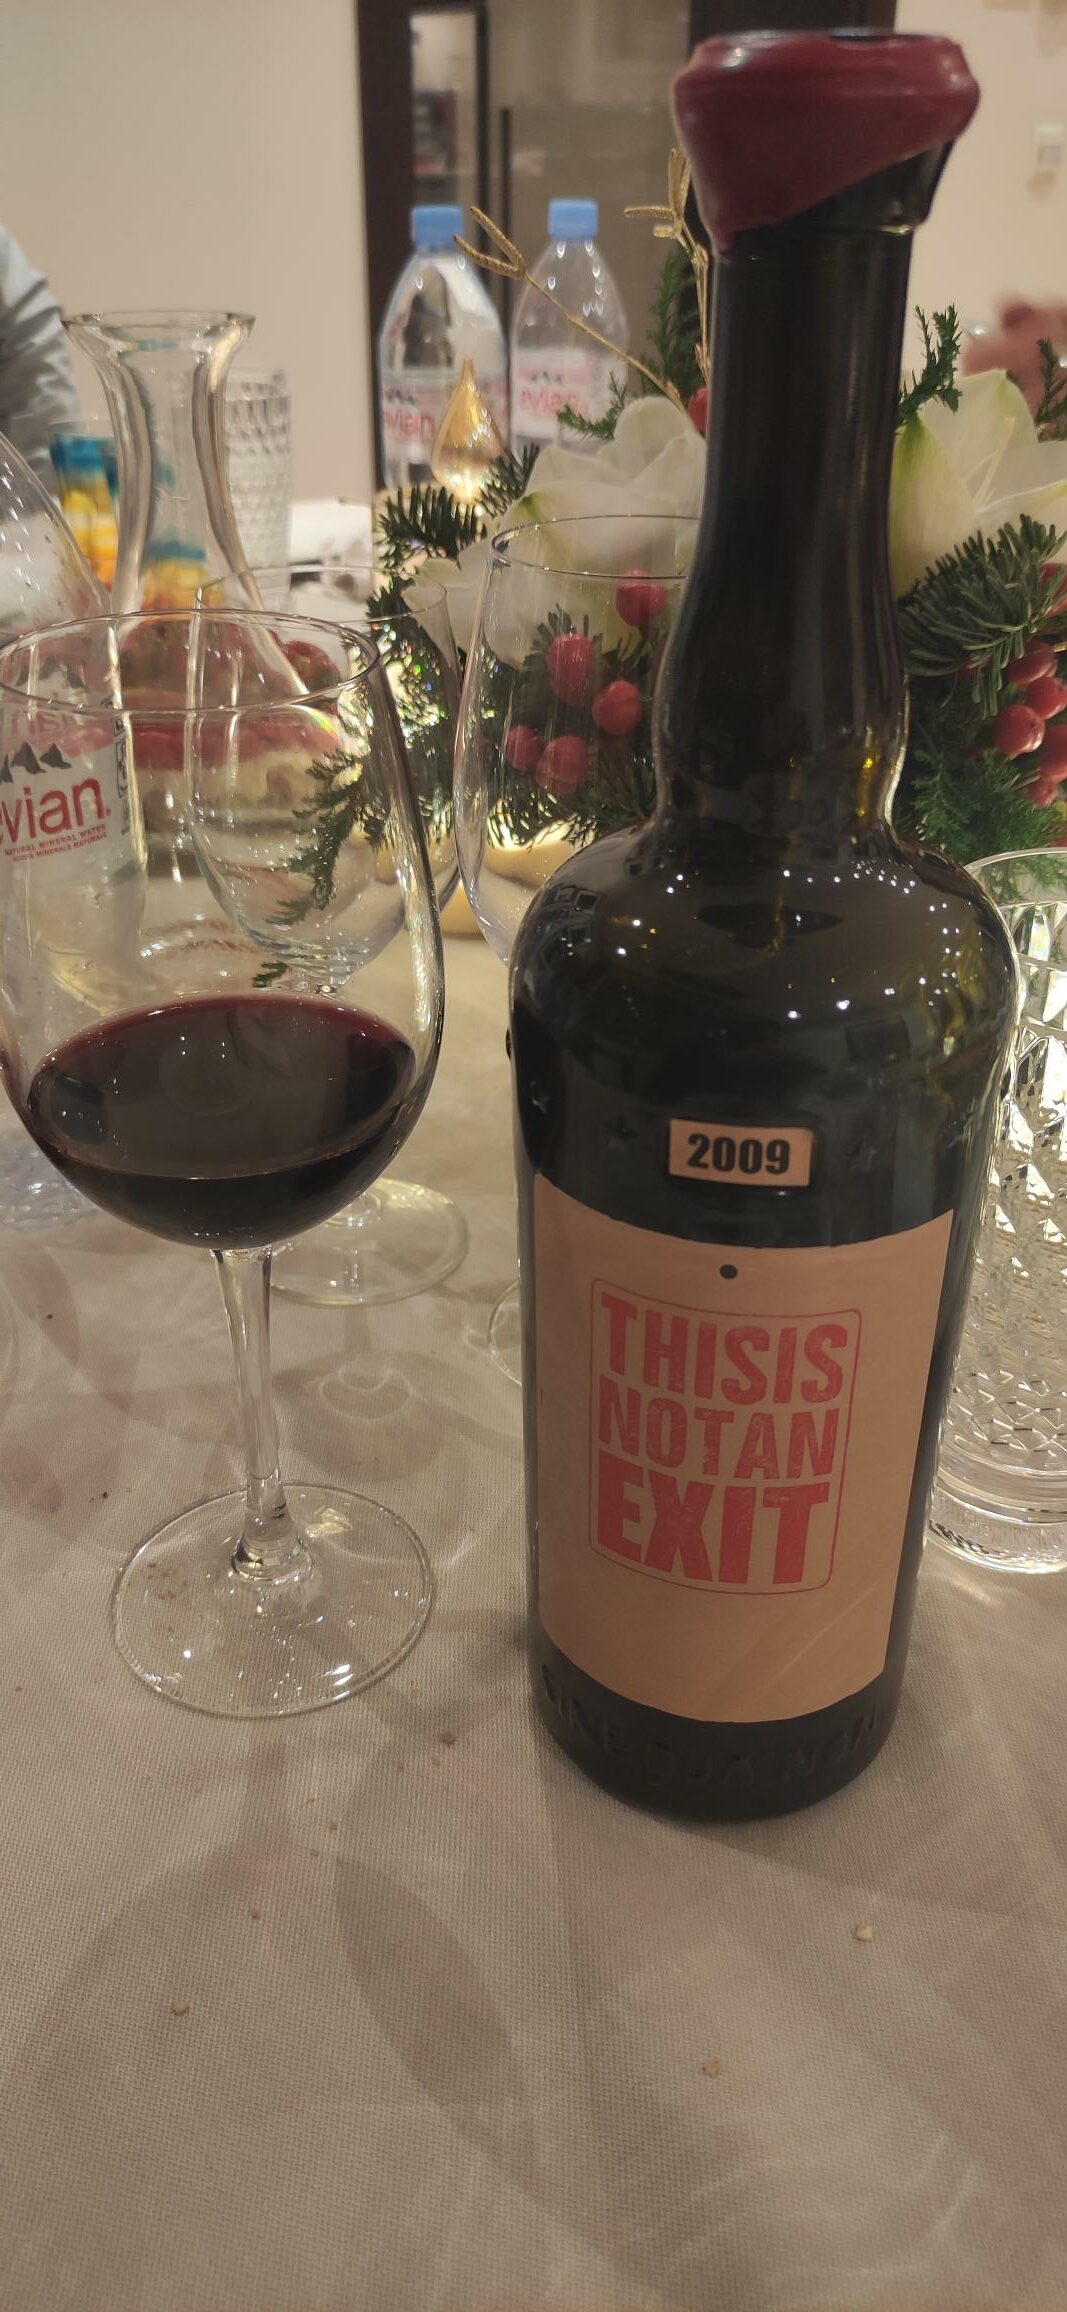 Read more about the article This is not an exit 2009 Syrah – Sine Qua Non